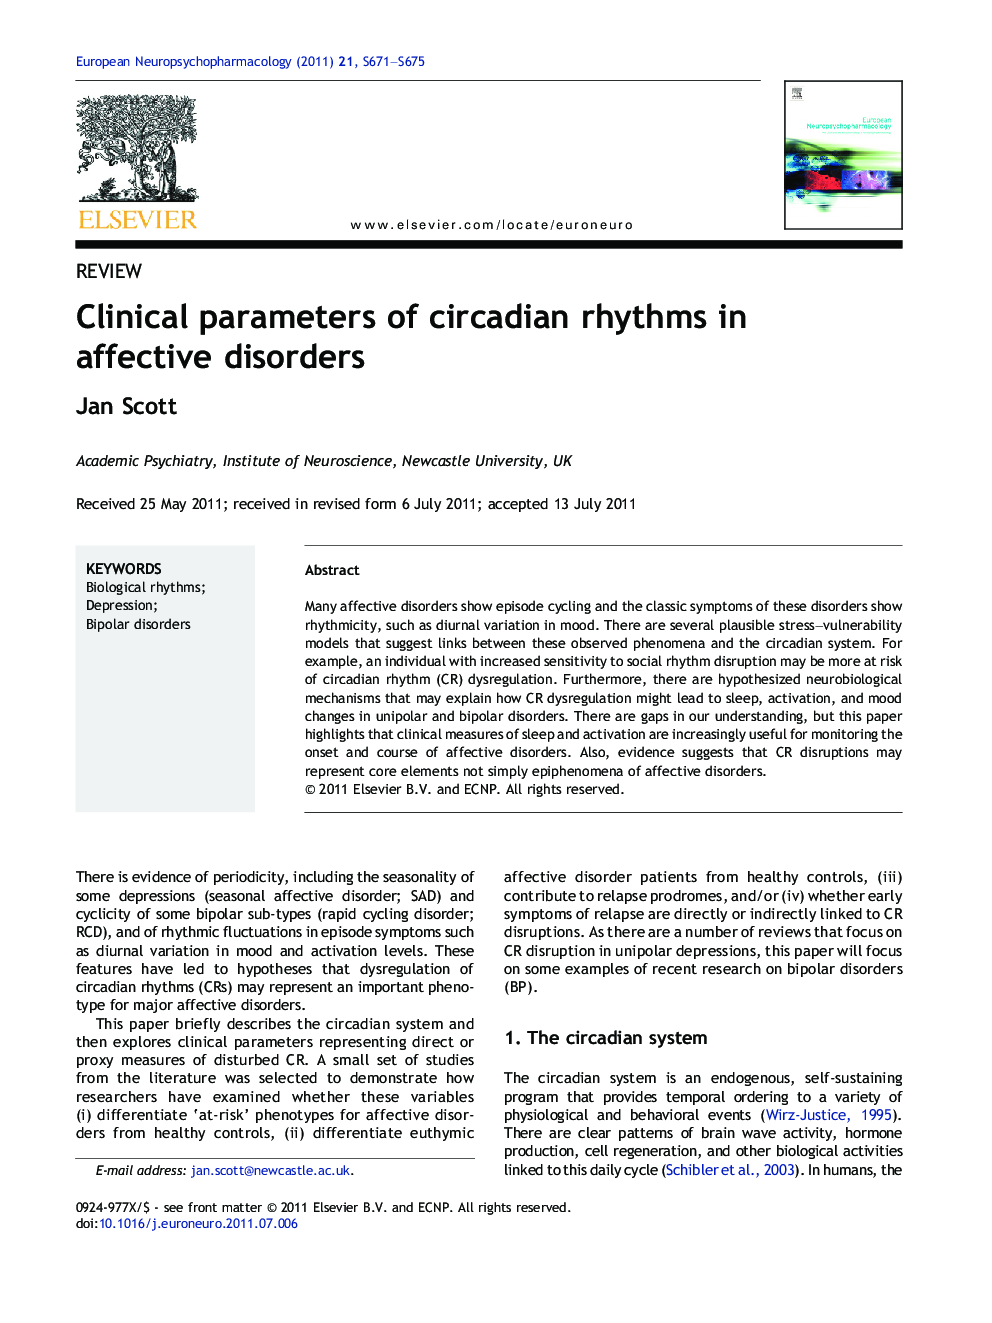 Clinical parameters of circadian rhythms in affective disorders